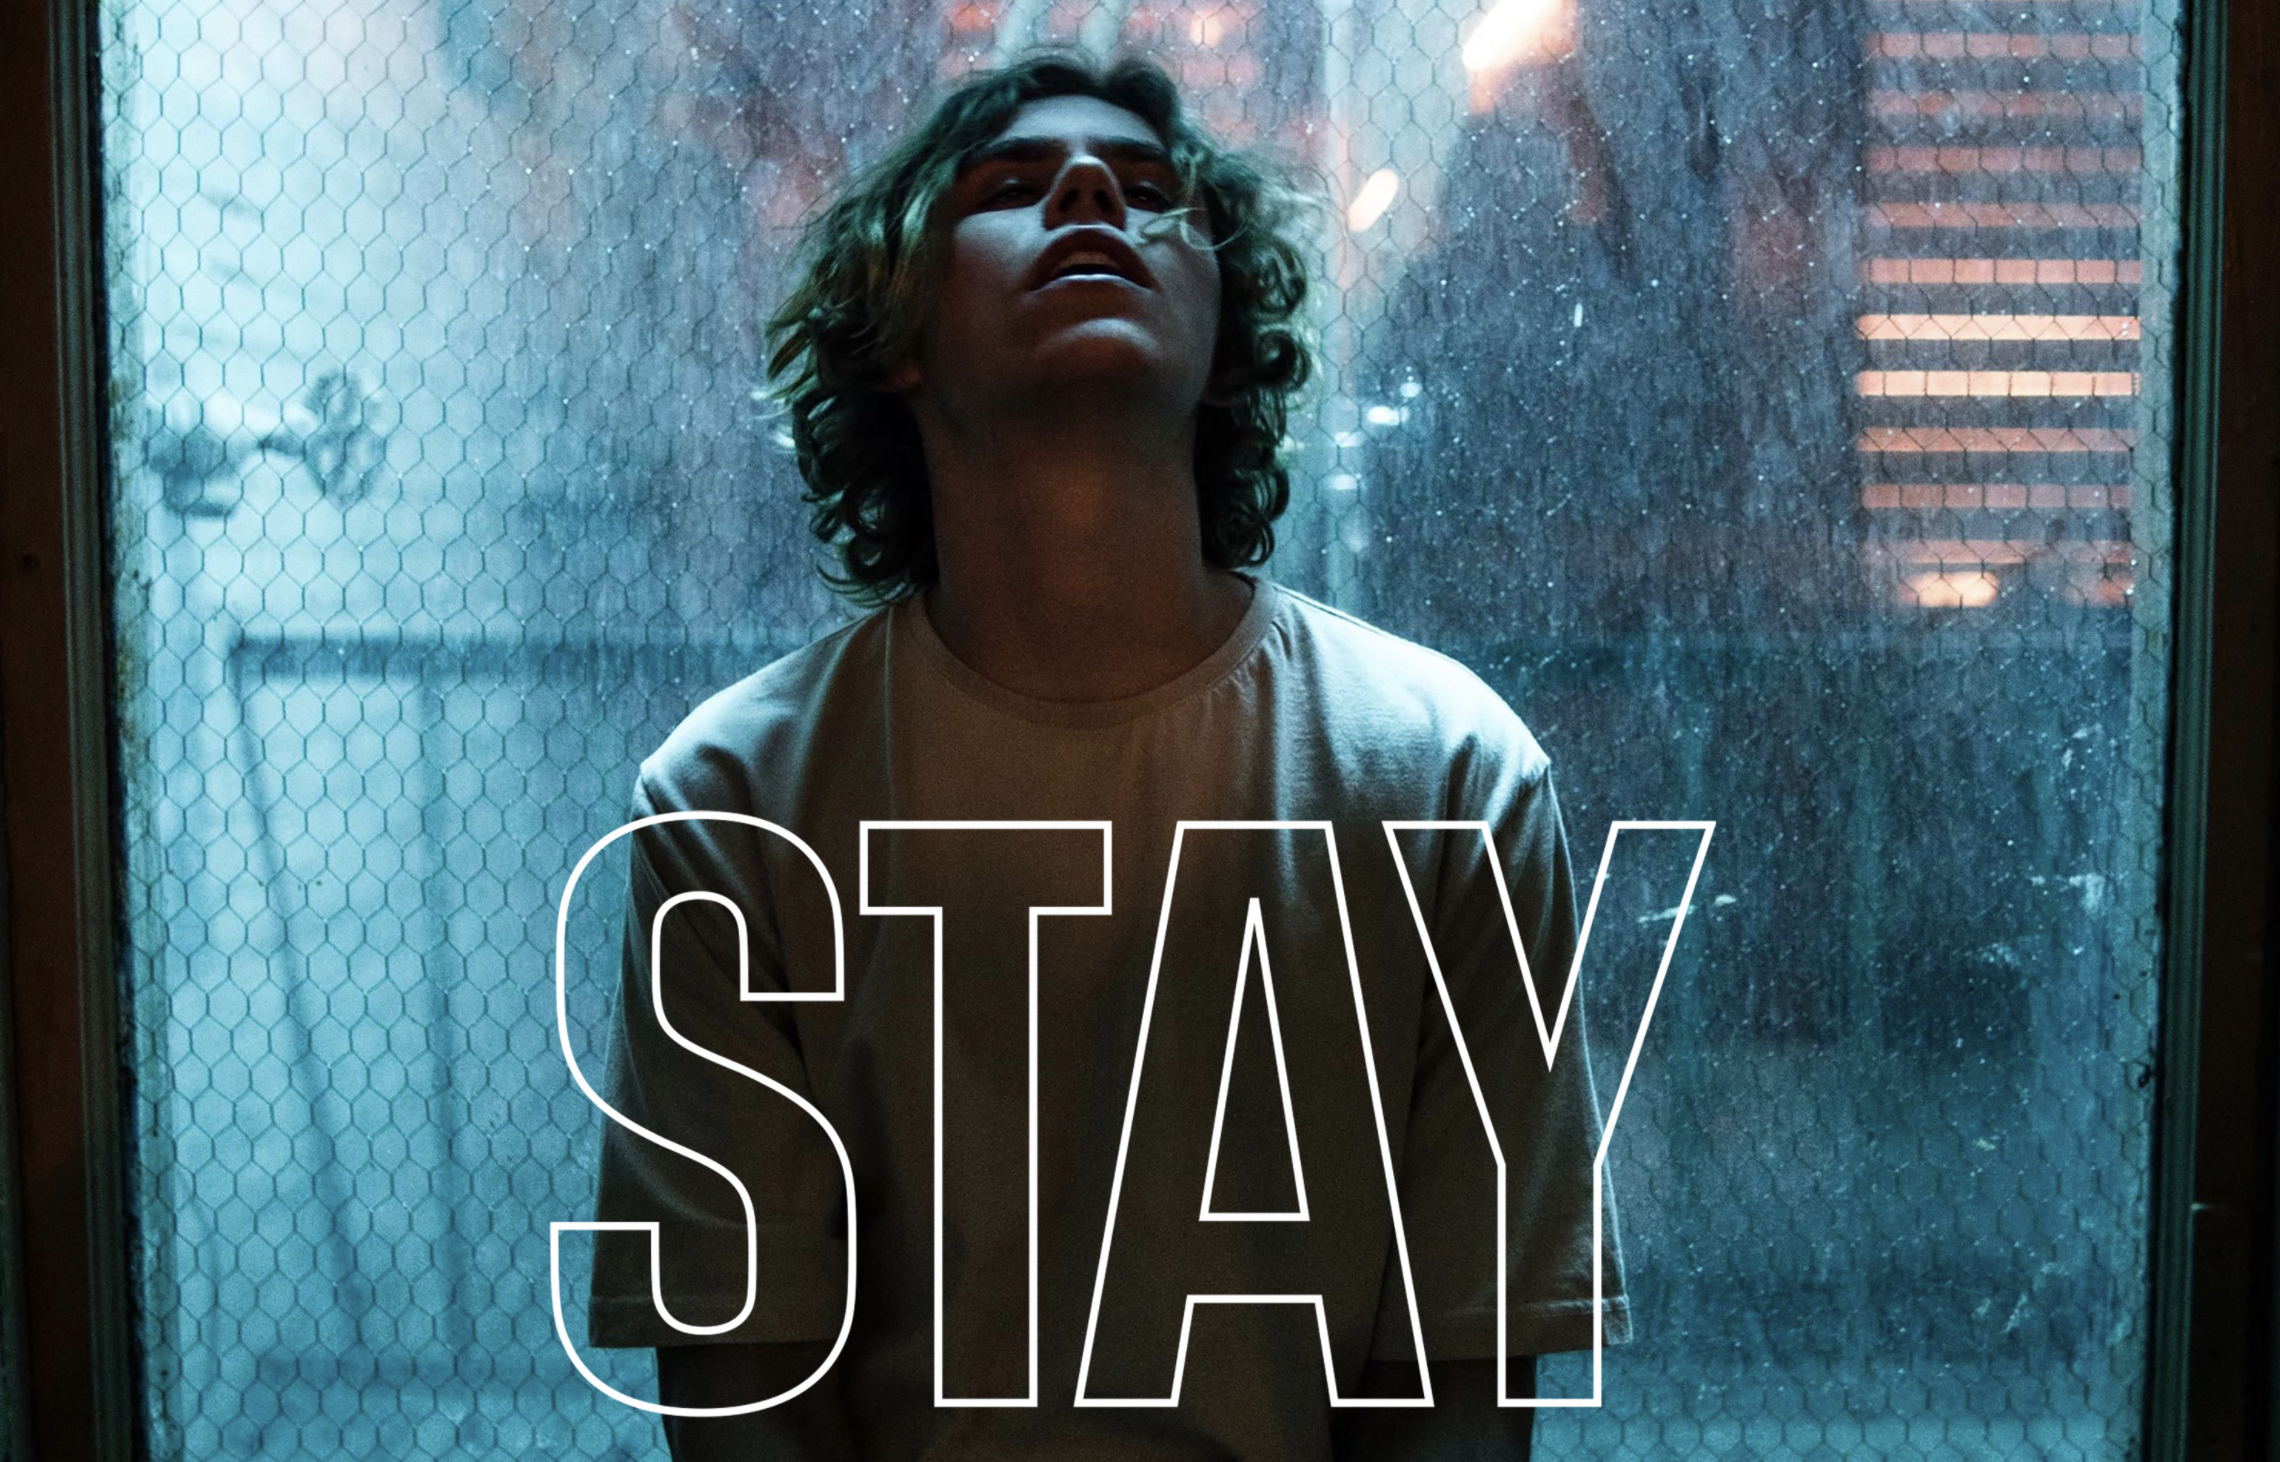 STAY (with Justin Bieber) - song and lyrics by The Kid LAROI, one